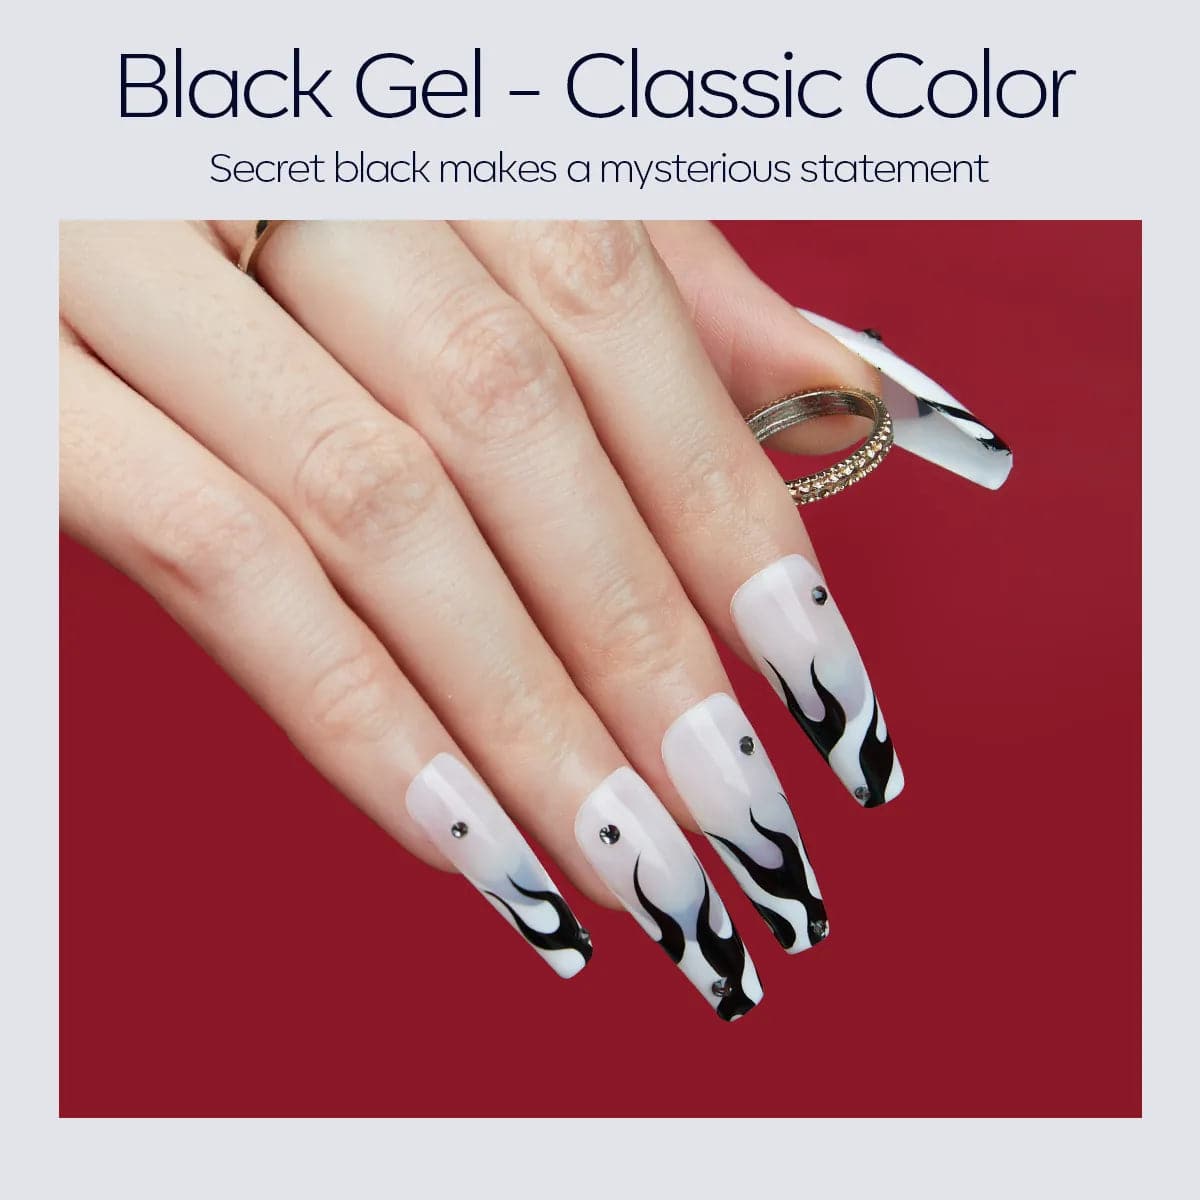 All In One - Single Solid Cream Gel Polish Color Cube Collection【Buy 5 get 1 free gift】